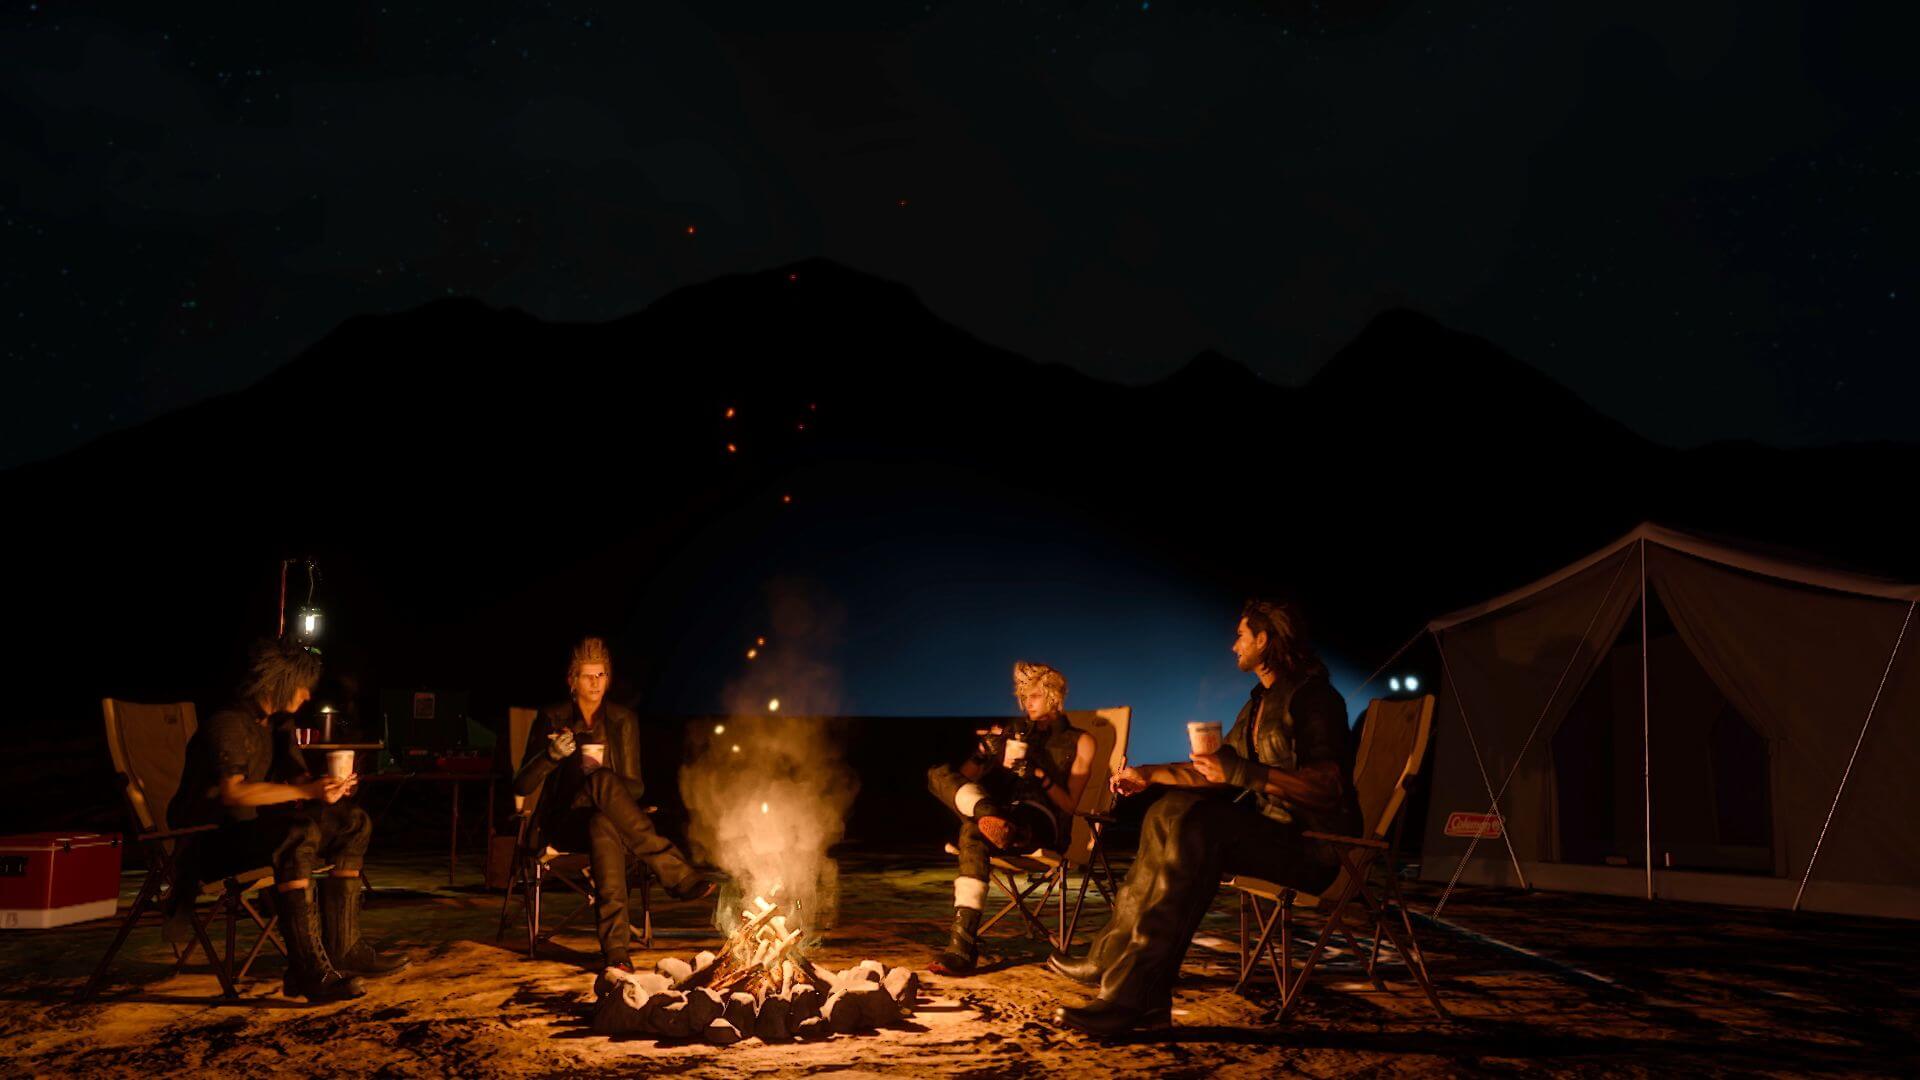 Final Fantasy XV Royal Edition Video Takes A Look Back With Some Of